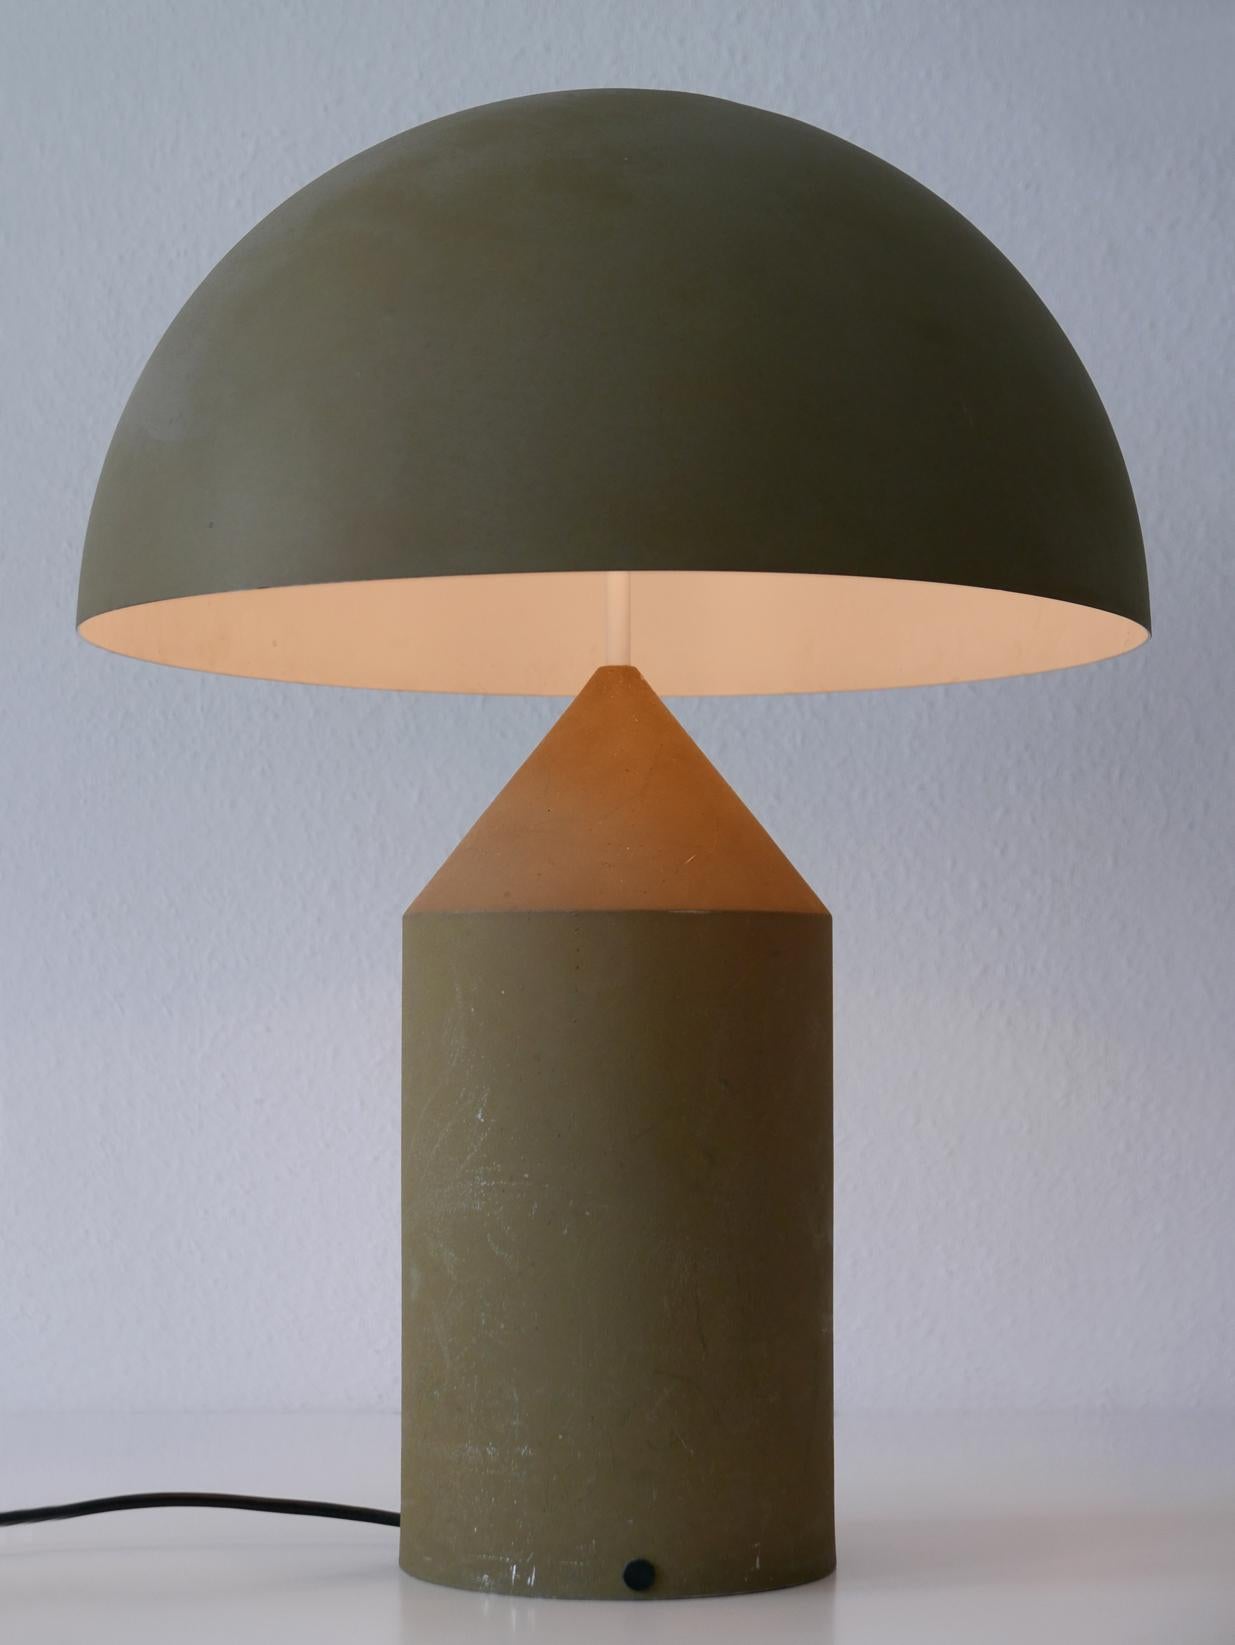 Spun Early & Huge Atollo Table Lamp by Vico Magistretti for Oluce, Italy, 1977